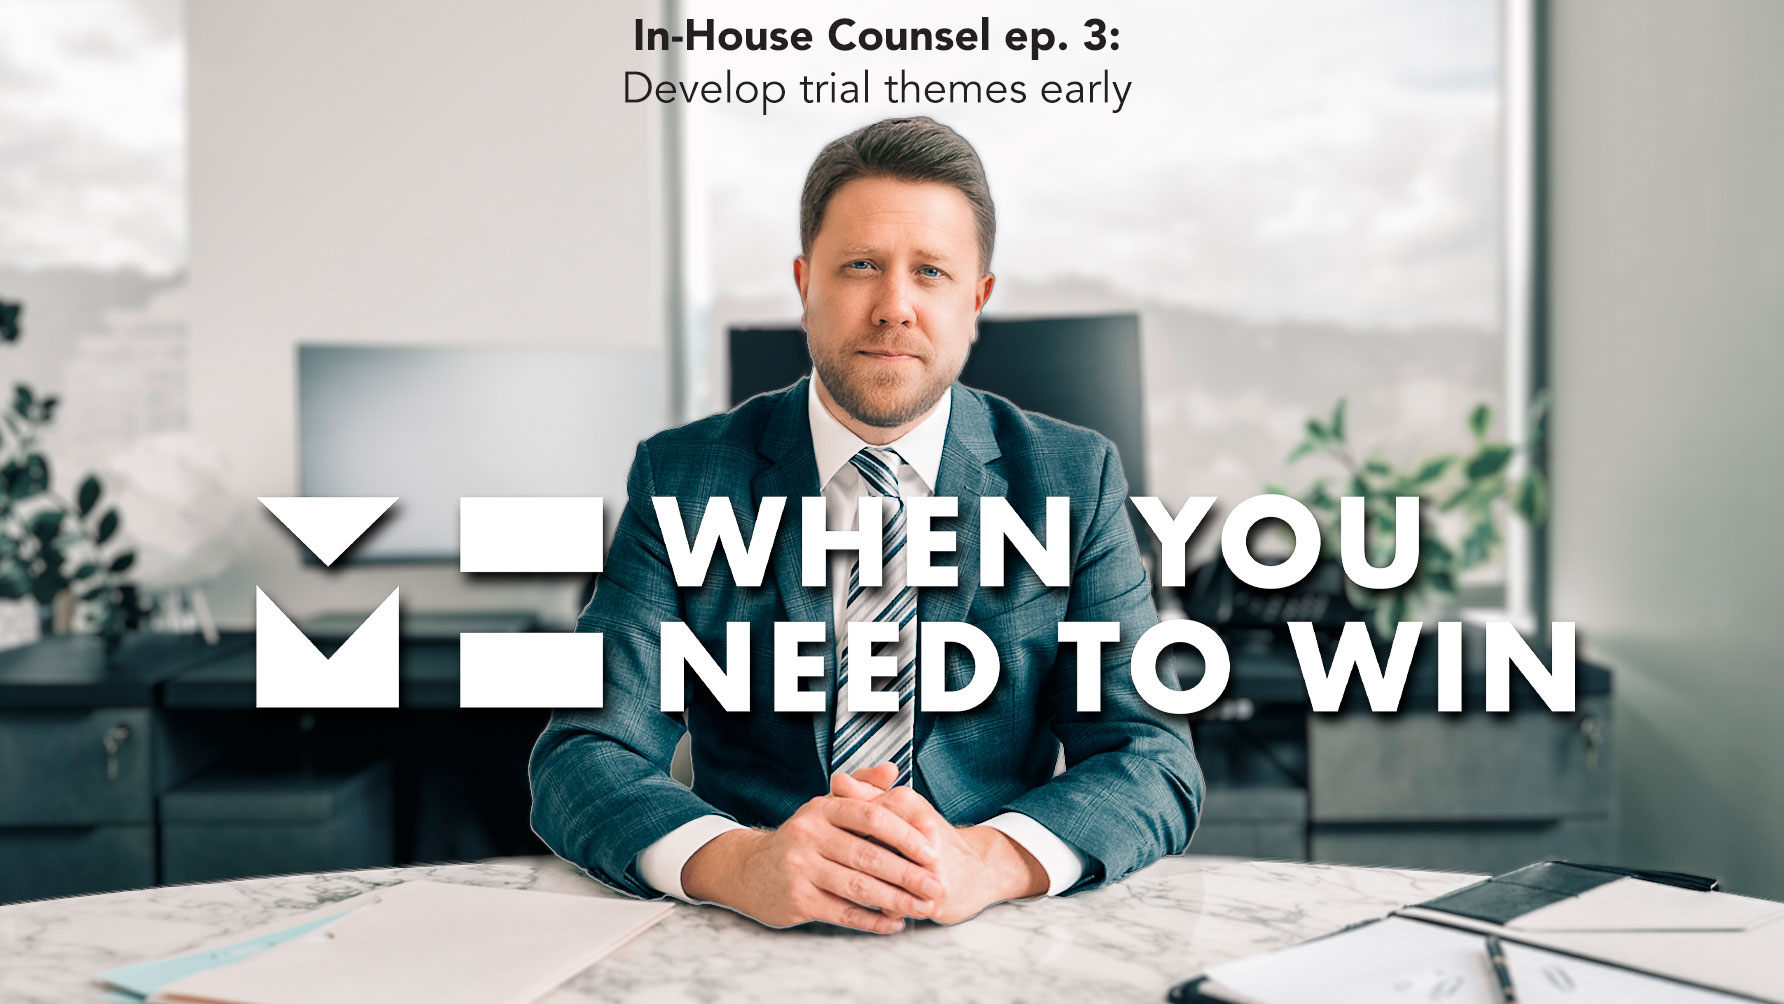 When You Need to Win - In-House Counsel - Develop Trial Themes Early